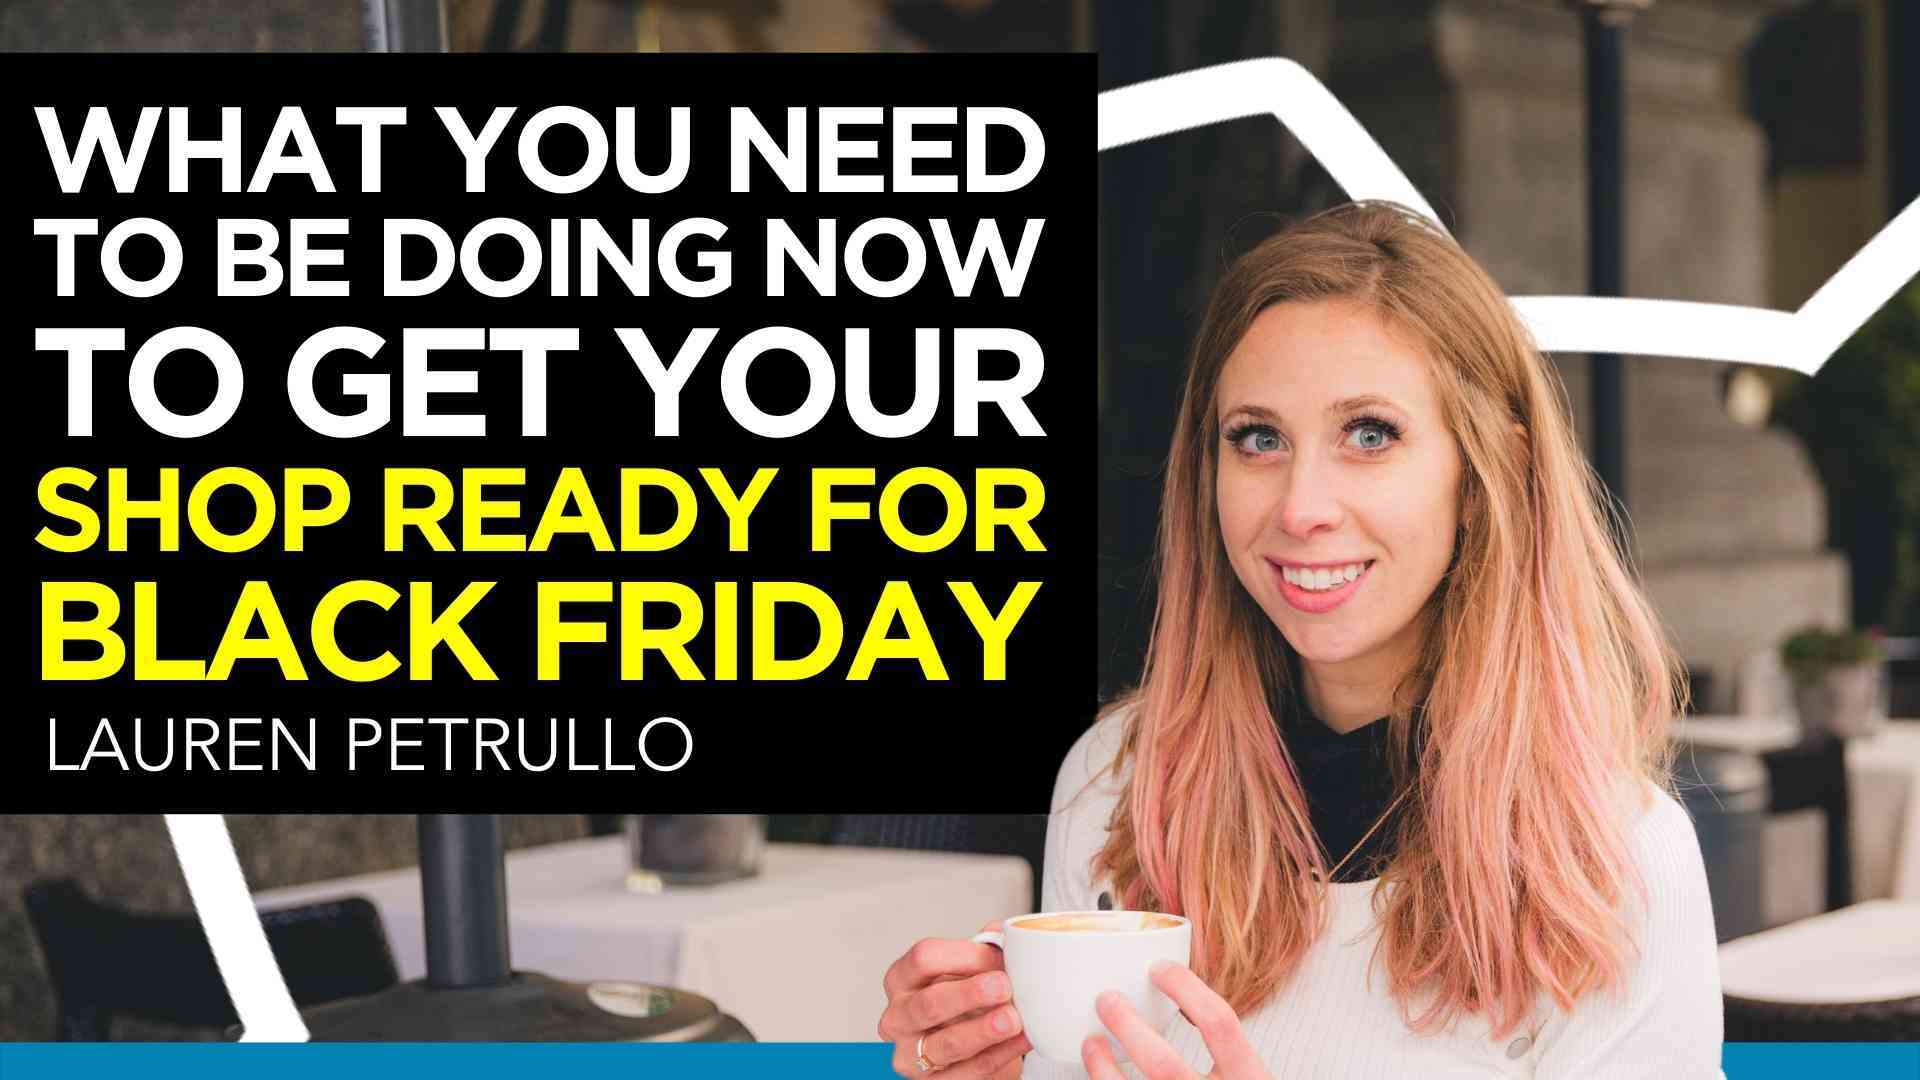 What You Need to be Doing NOW to Get Your Shop Ready for Black Friday